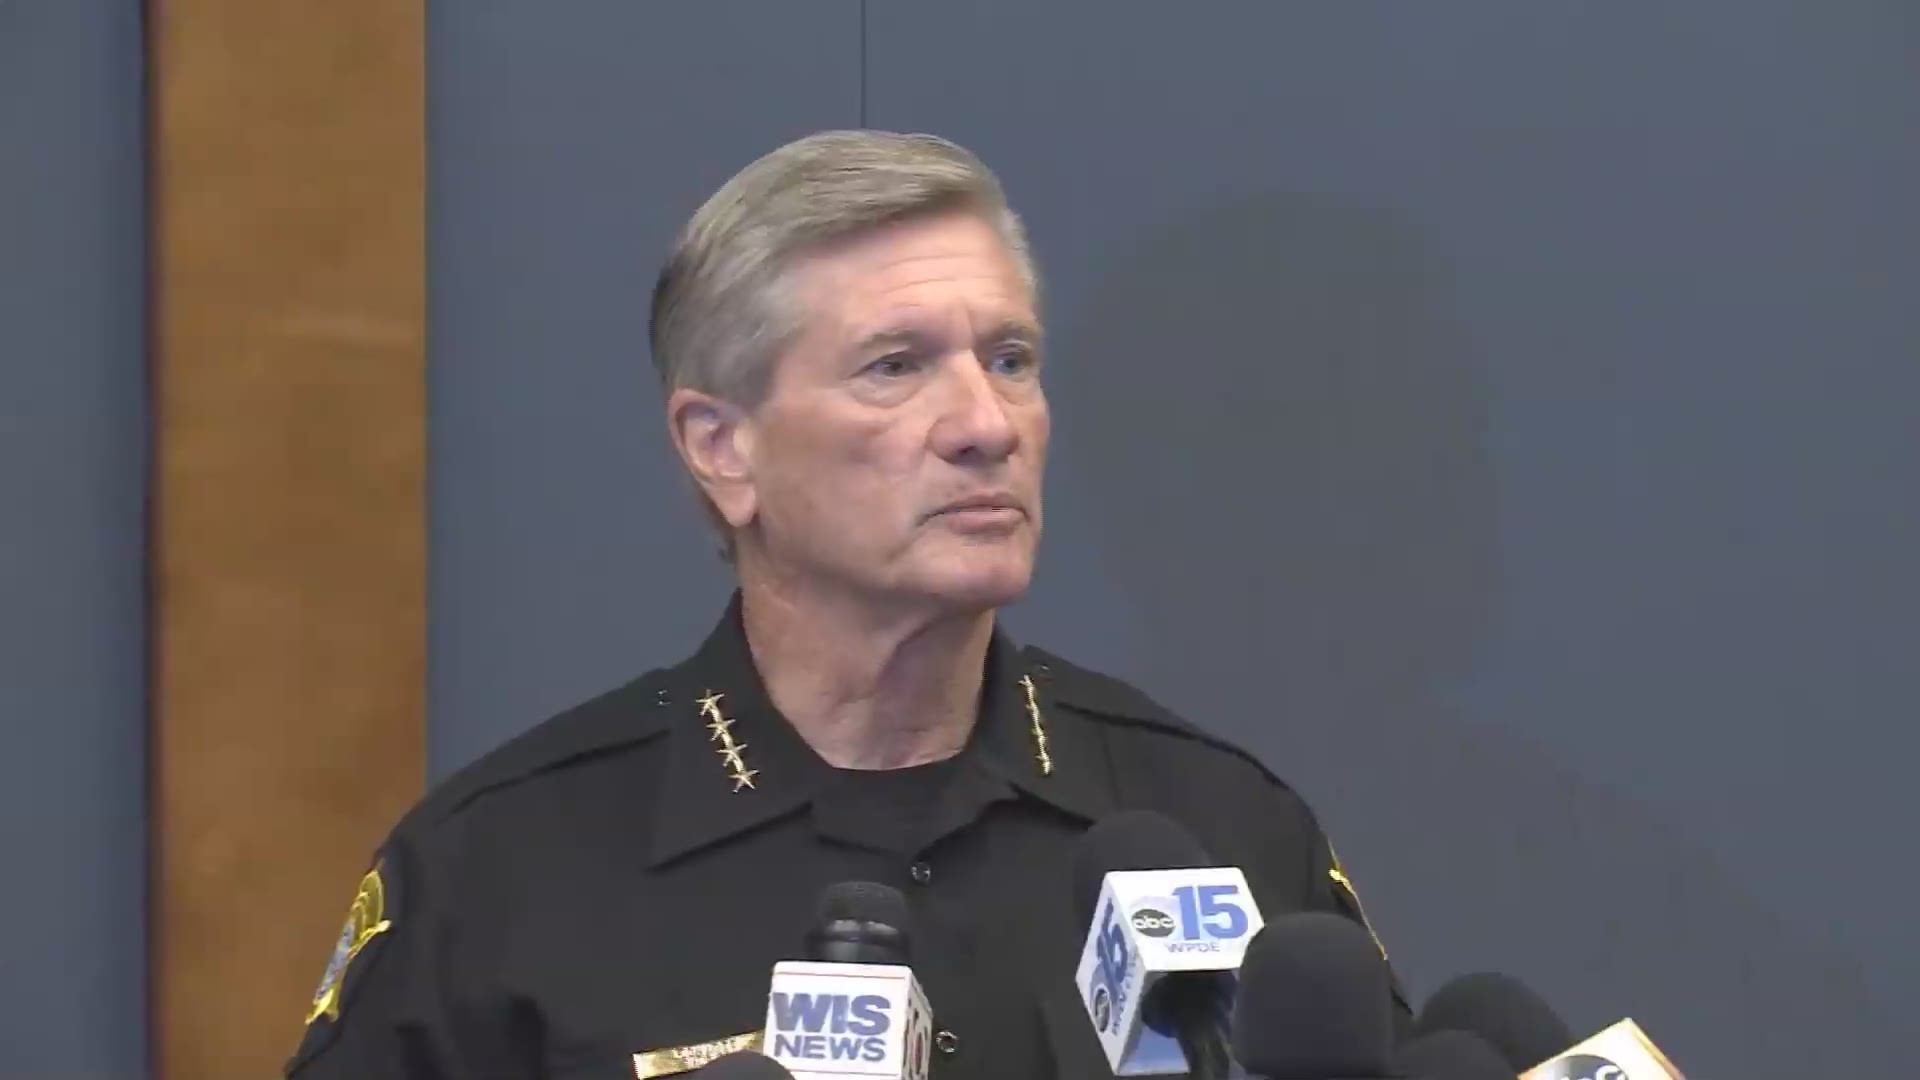 Sheriff Leon Lott said dozens of guns were found in the home of the man charged with shooting seven South Carolina officers.